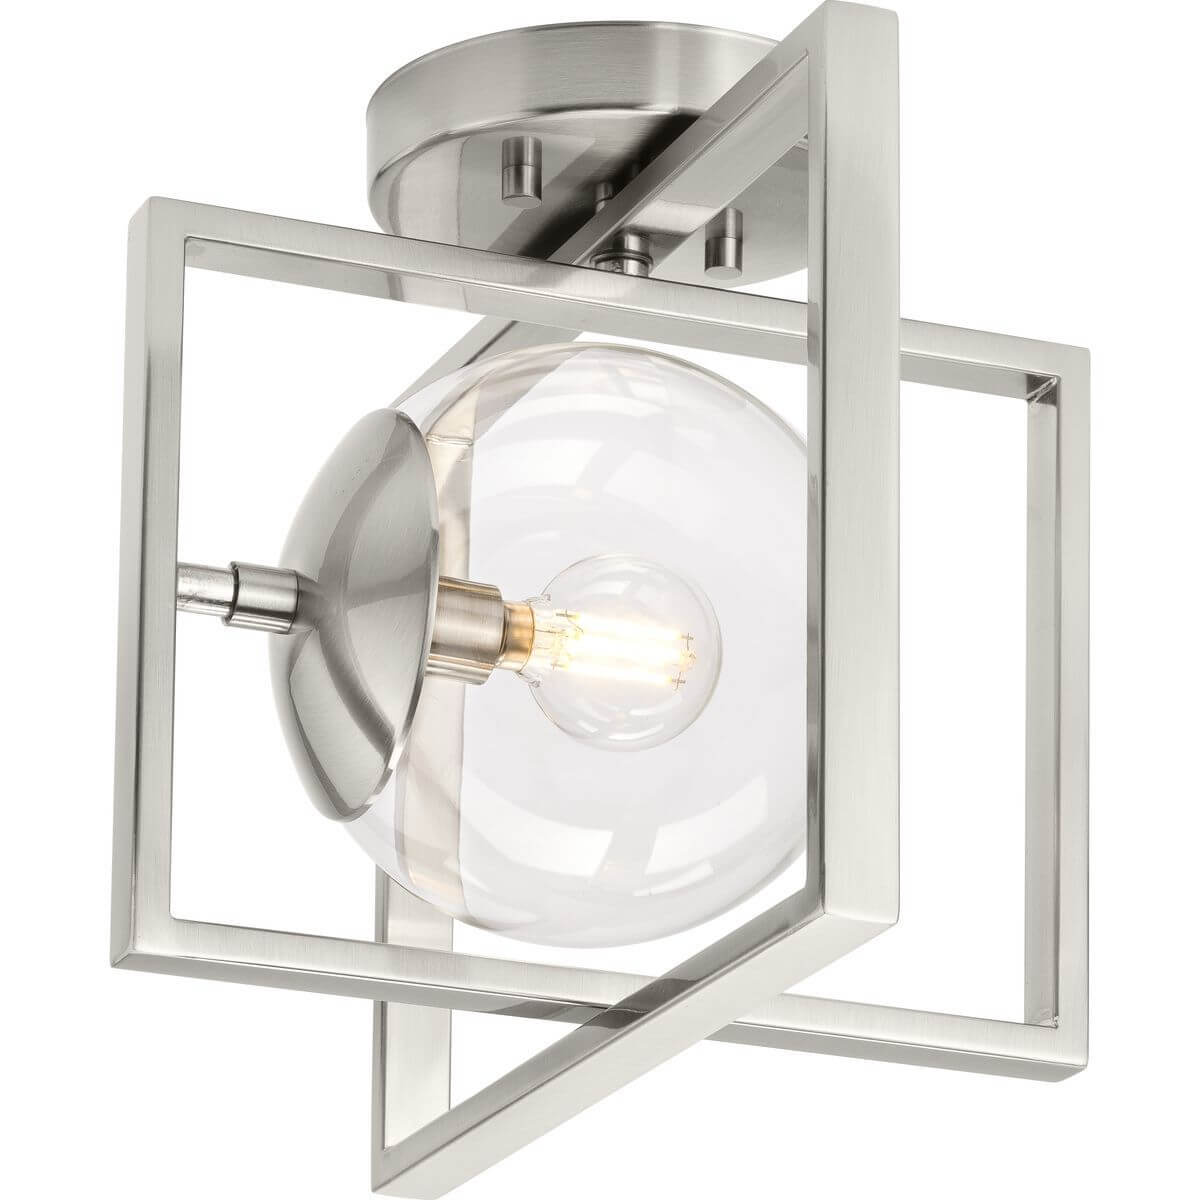 Progress Lighting Atwell 1 Light 12 inch Semi-Flush Mount in Brushed Nickel with Clear Glass P350218-009